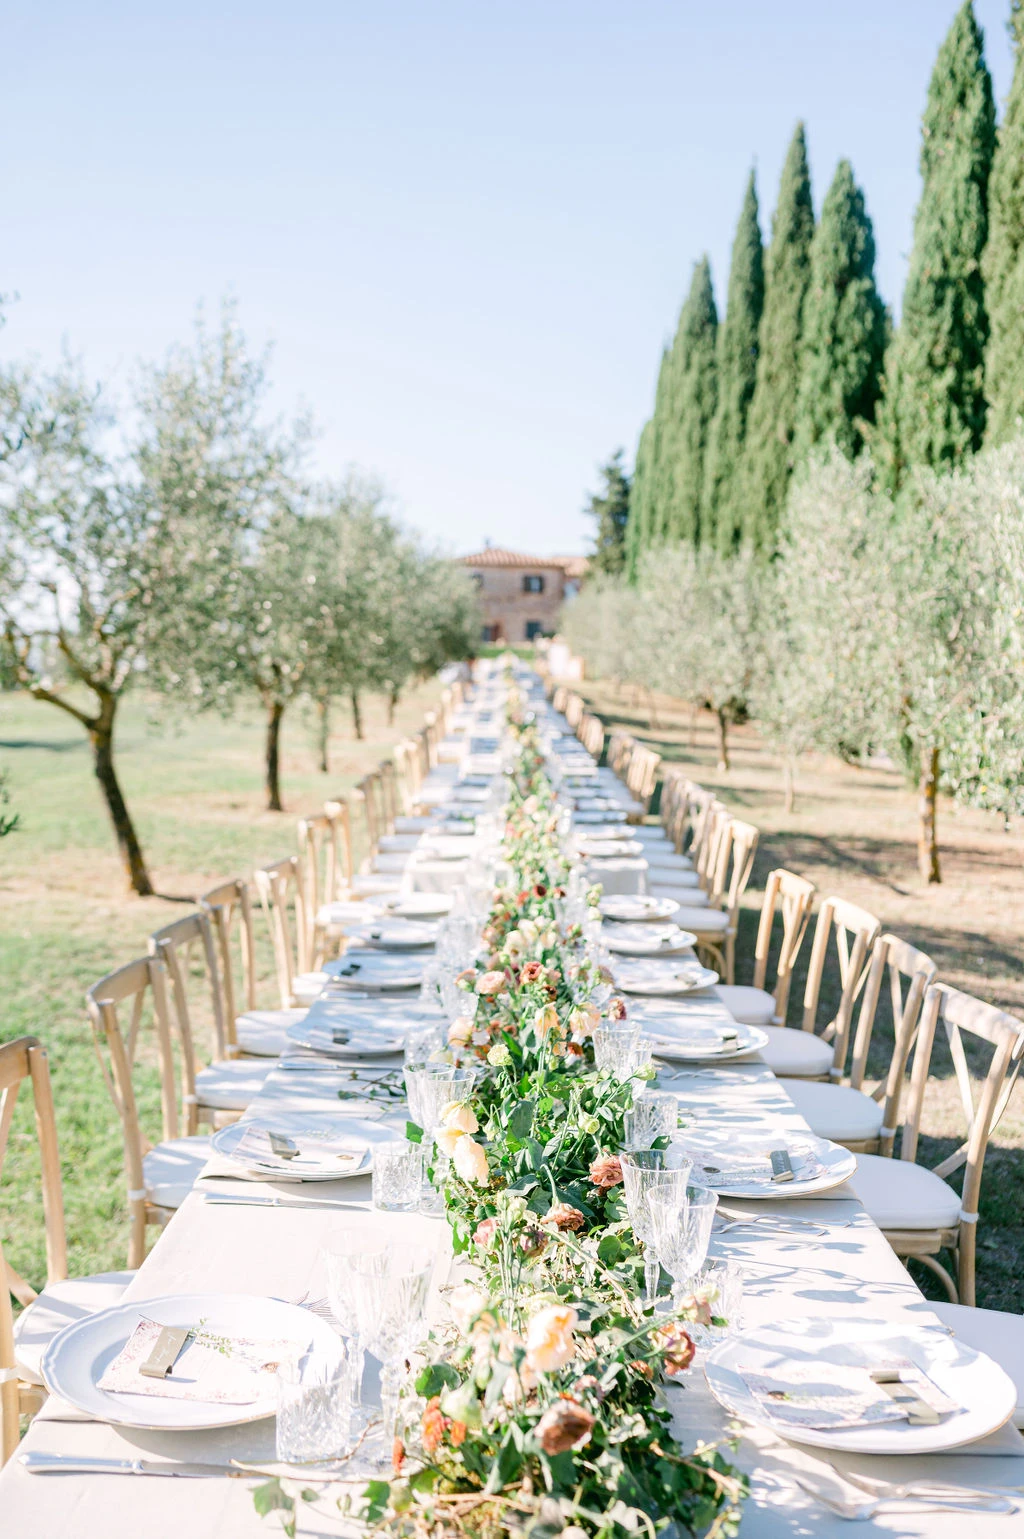 A wedding lunch set among the olive groves in Tuscany